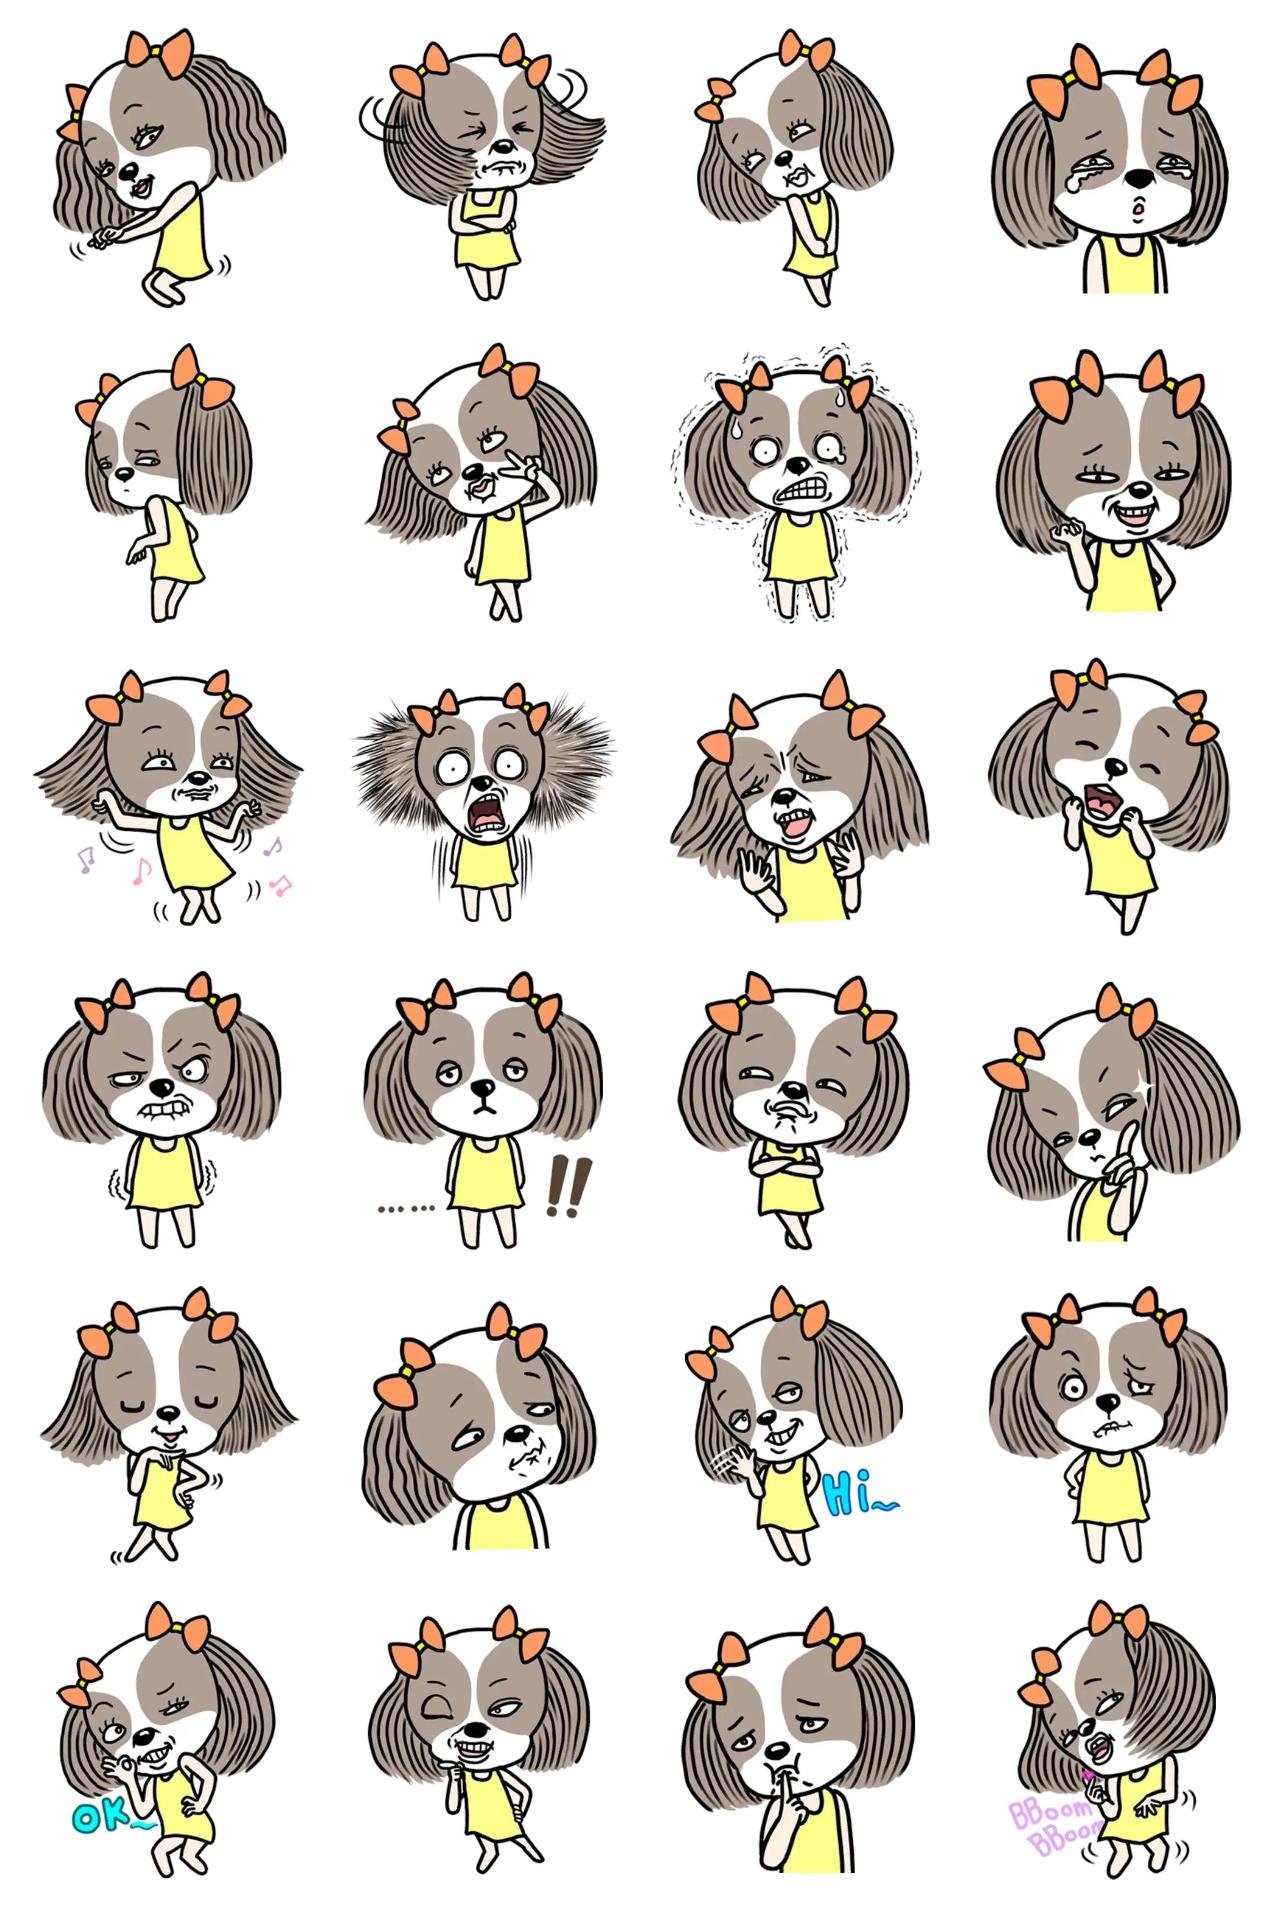 Dancing Shitzu Bobo Animals sticker pack for Whatsapp, Telegram, Signal, and others chatting and message apps